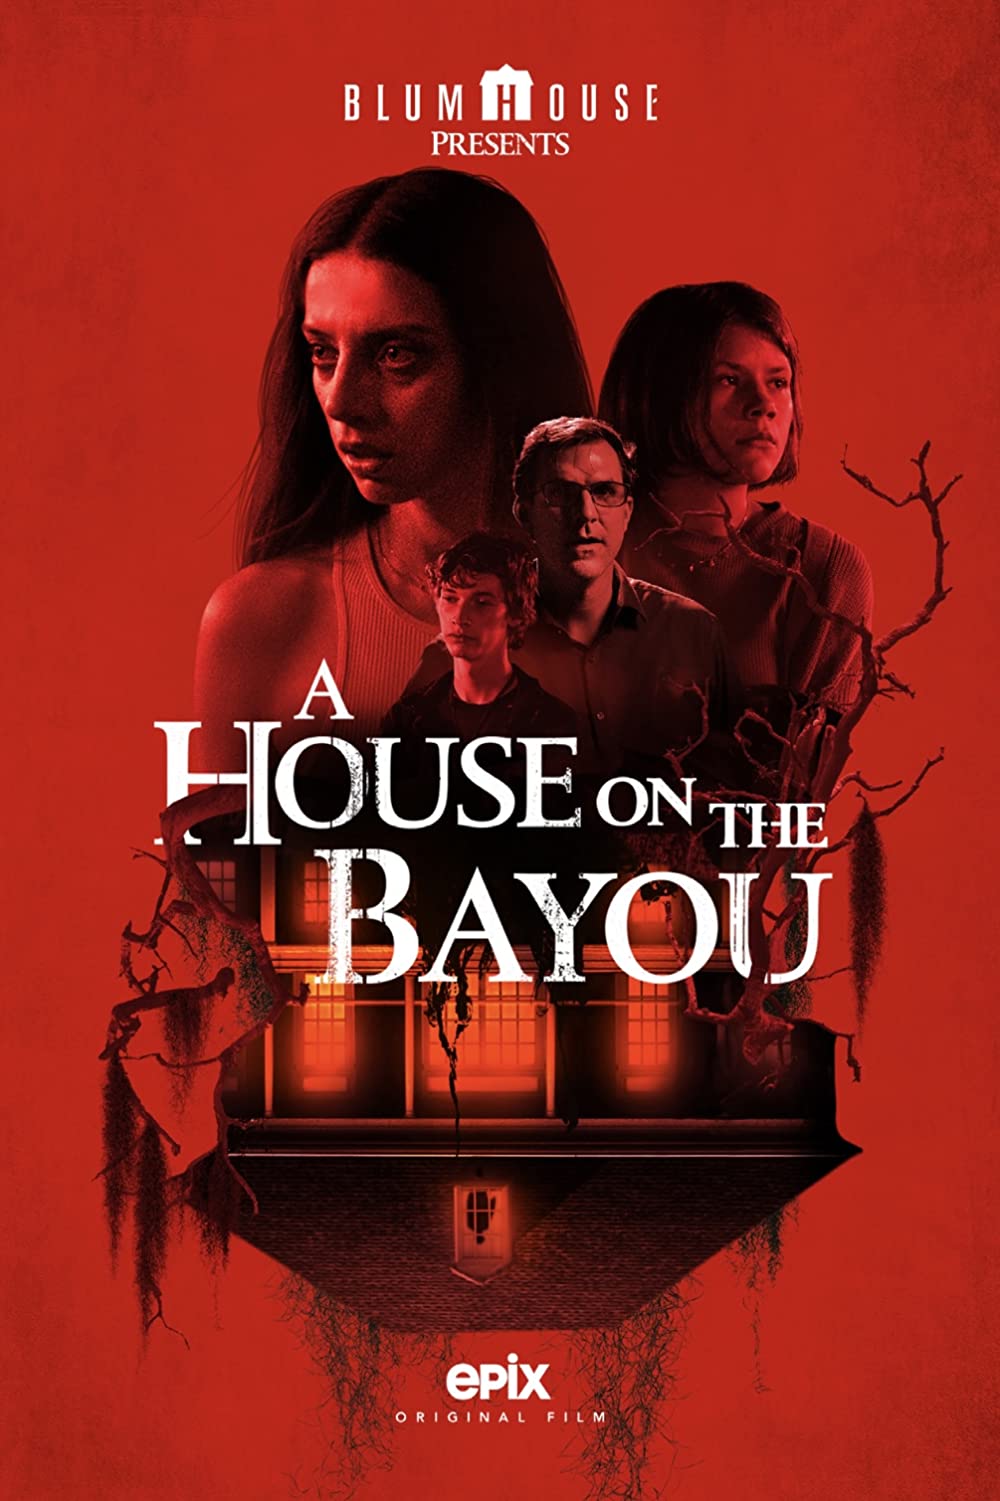 Red background, the leading cast at the top, upside down is the house on the bayou